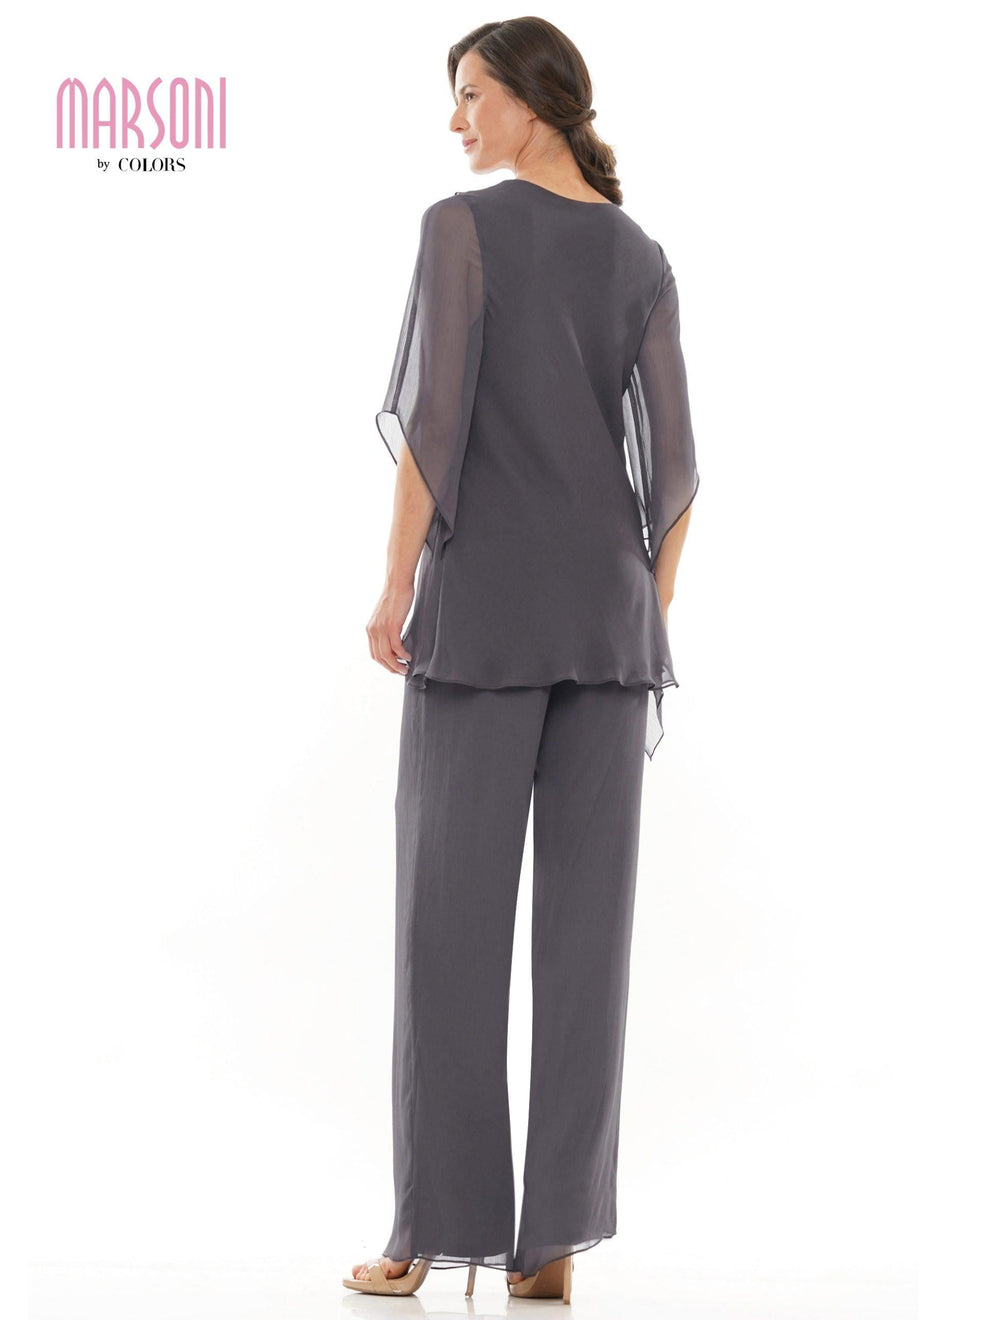 Charcoal 14 Marsoni Formal Mother of the Bride Pant Suit Sale for $101. ...